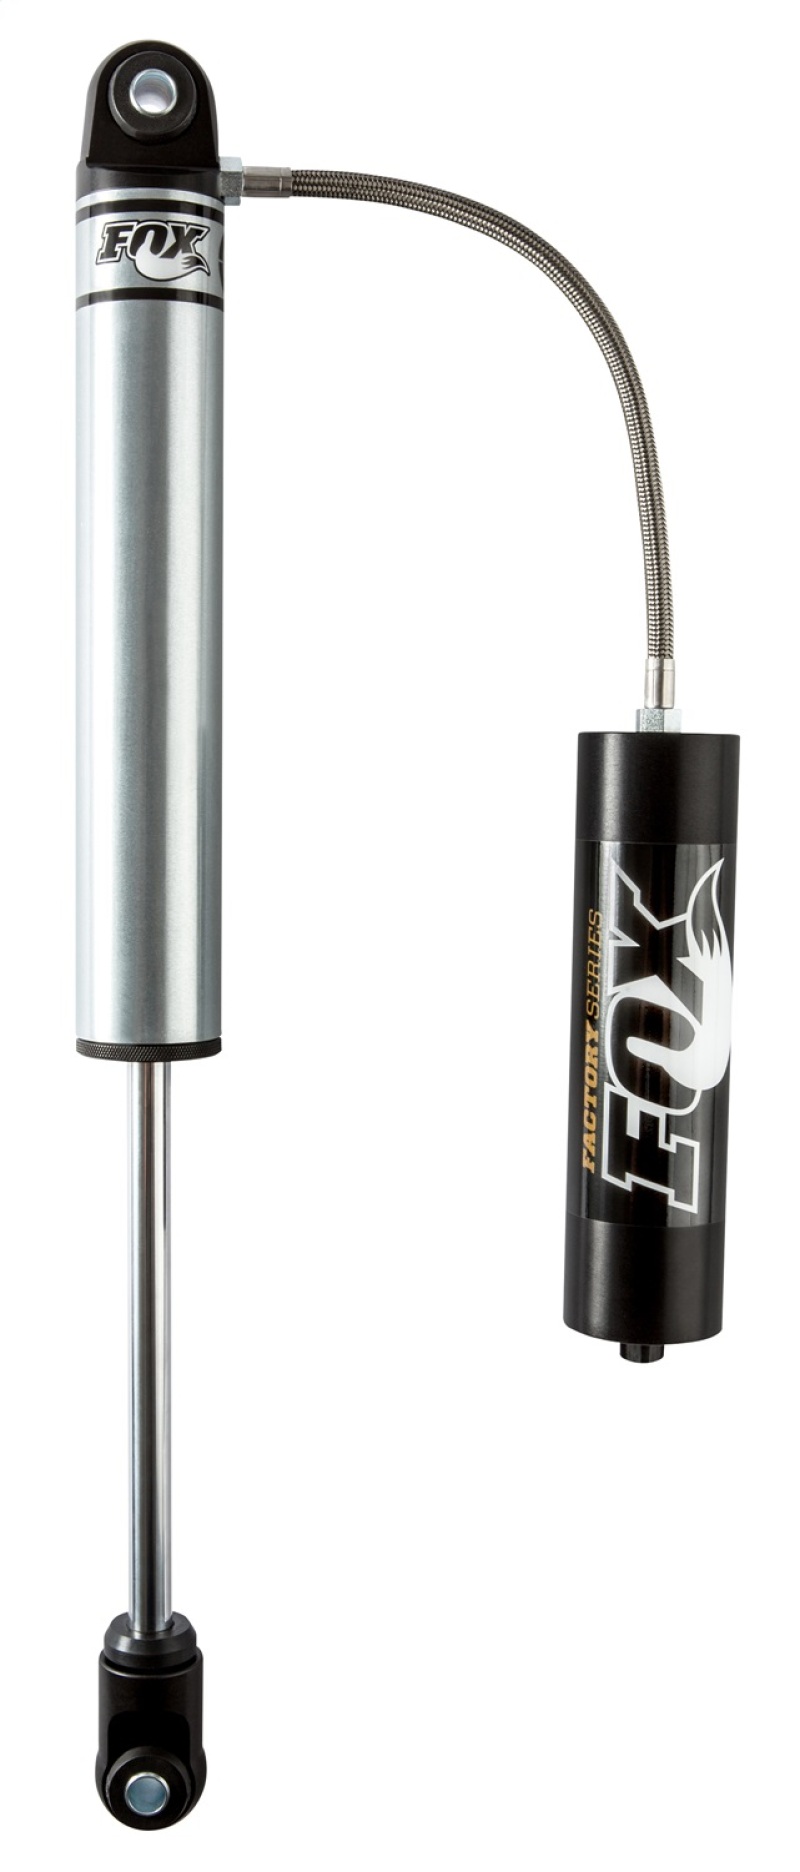 Fox 2.0 Factory Series 10in Smooth Bdy Remote Res. Shock w/Hrglss Eyelet/Cap 5/8in Shft (30/75)- Blk - 980-24-032